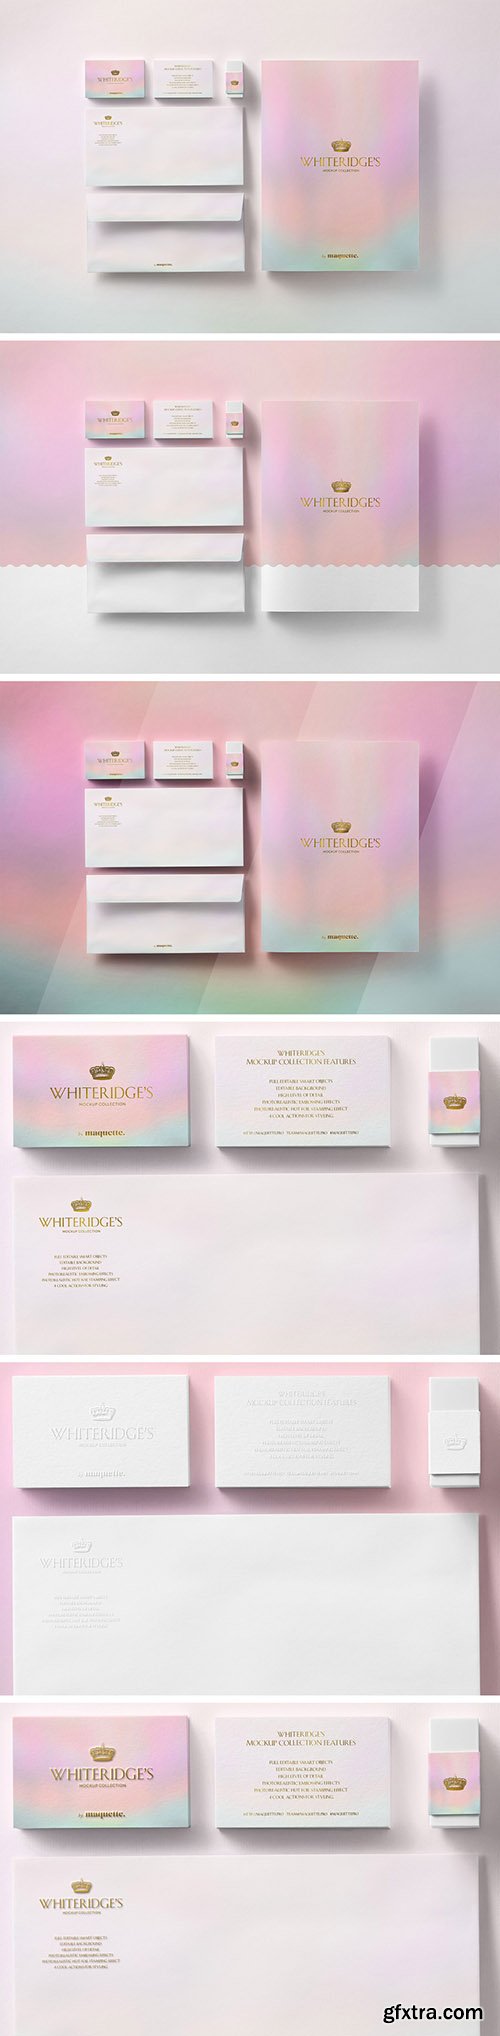 Luxury Gold-Embossed Corporate Stationery Mockup 12 130437267